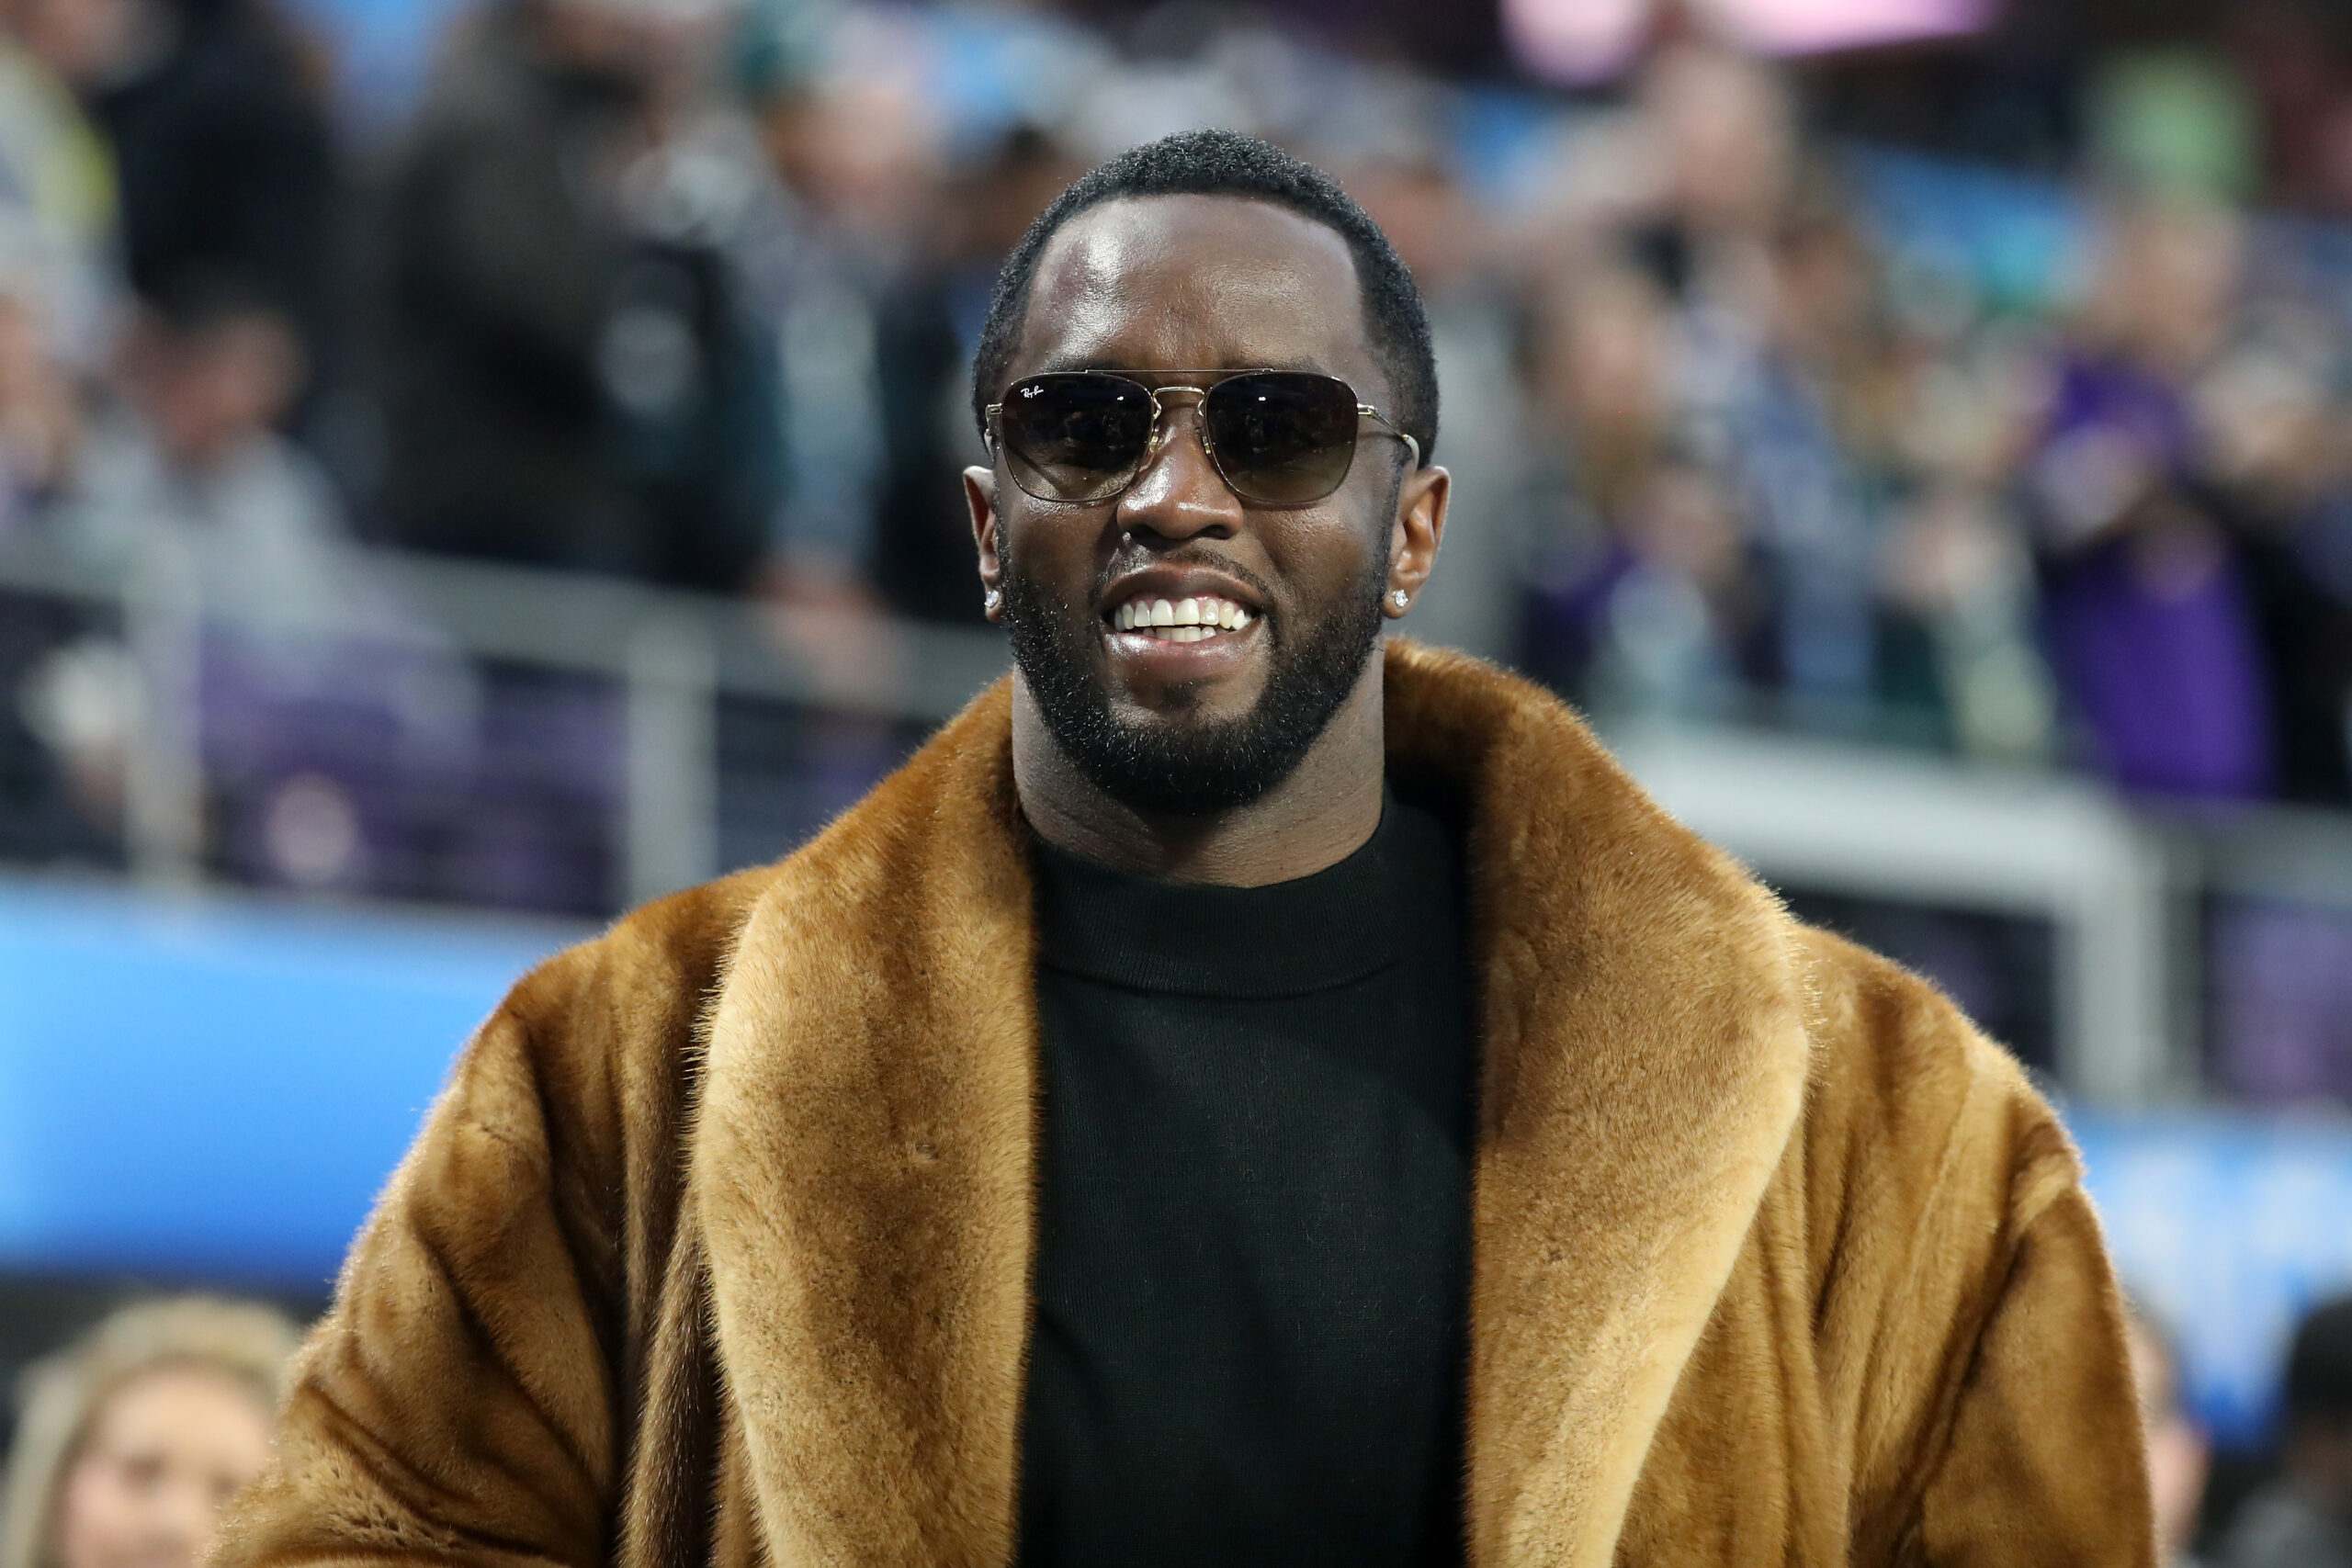 DIDDY EXCEEDS KANYE WEST ON THE HIP HOP RICH LIST AND IS OFFICIALLY DECLARED A BILLIONAIRE